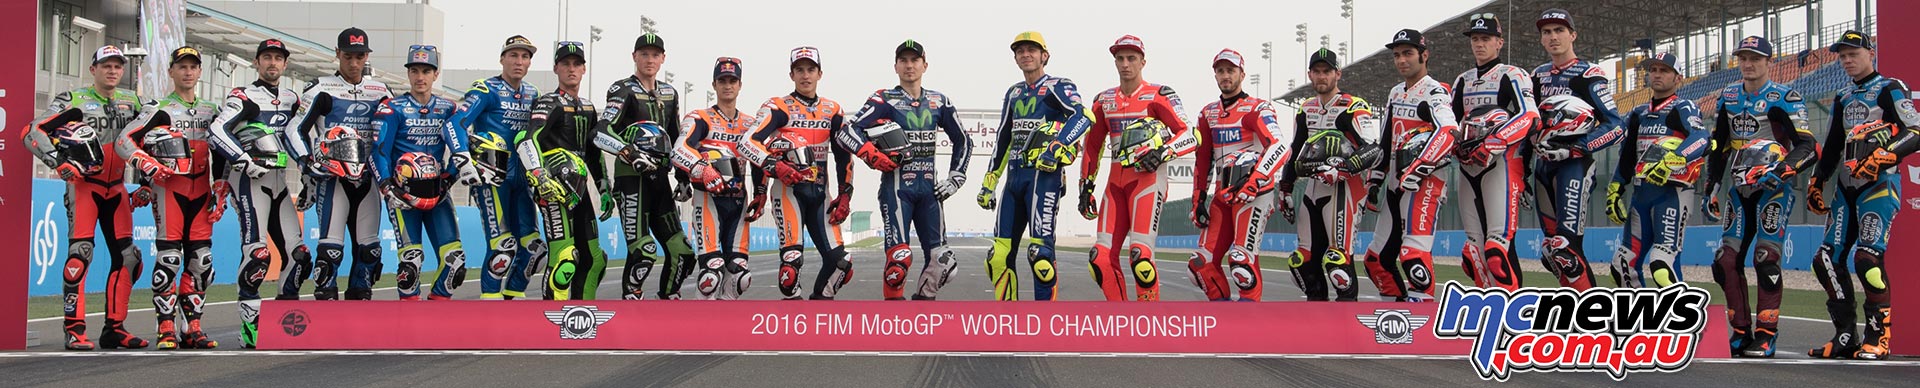 Marty S 16 Motogp Form Guide Motorcycle News Sport And Reviews